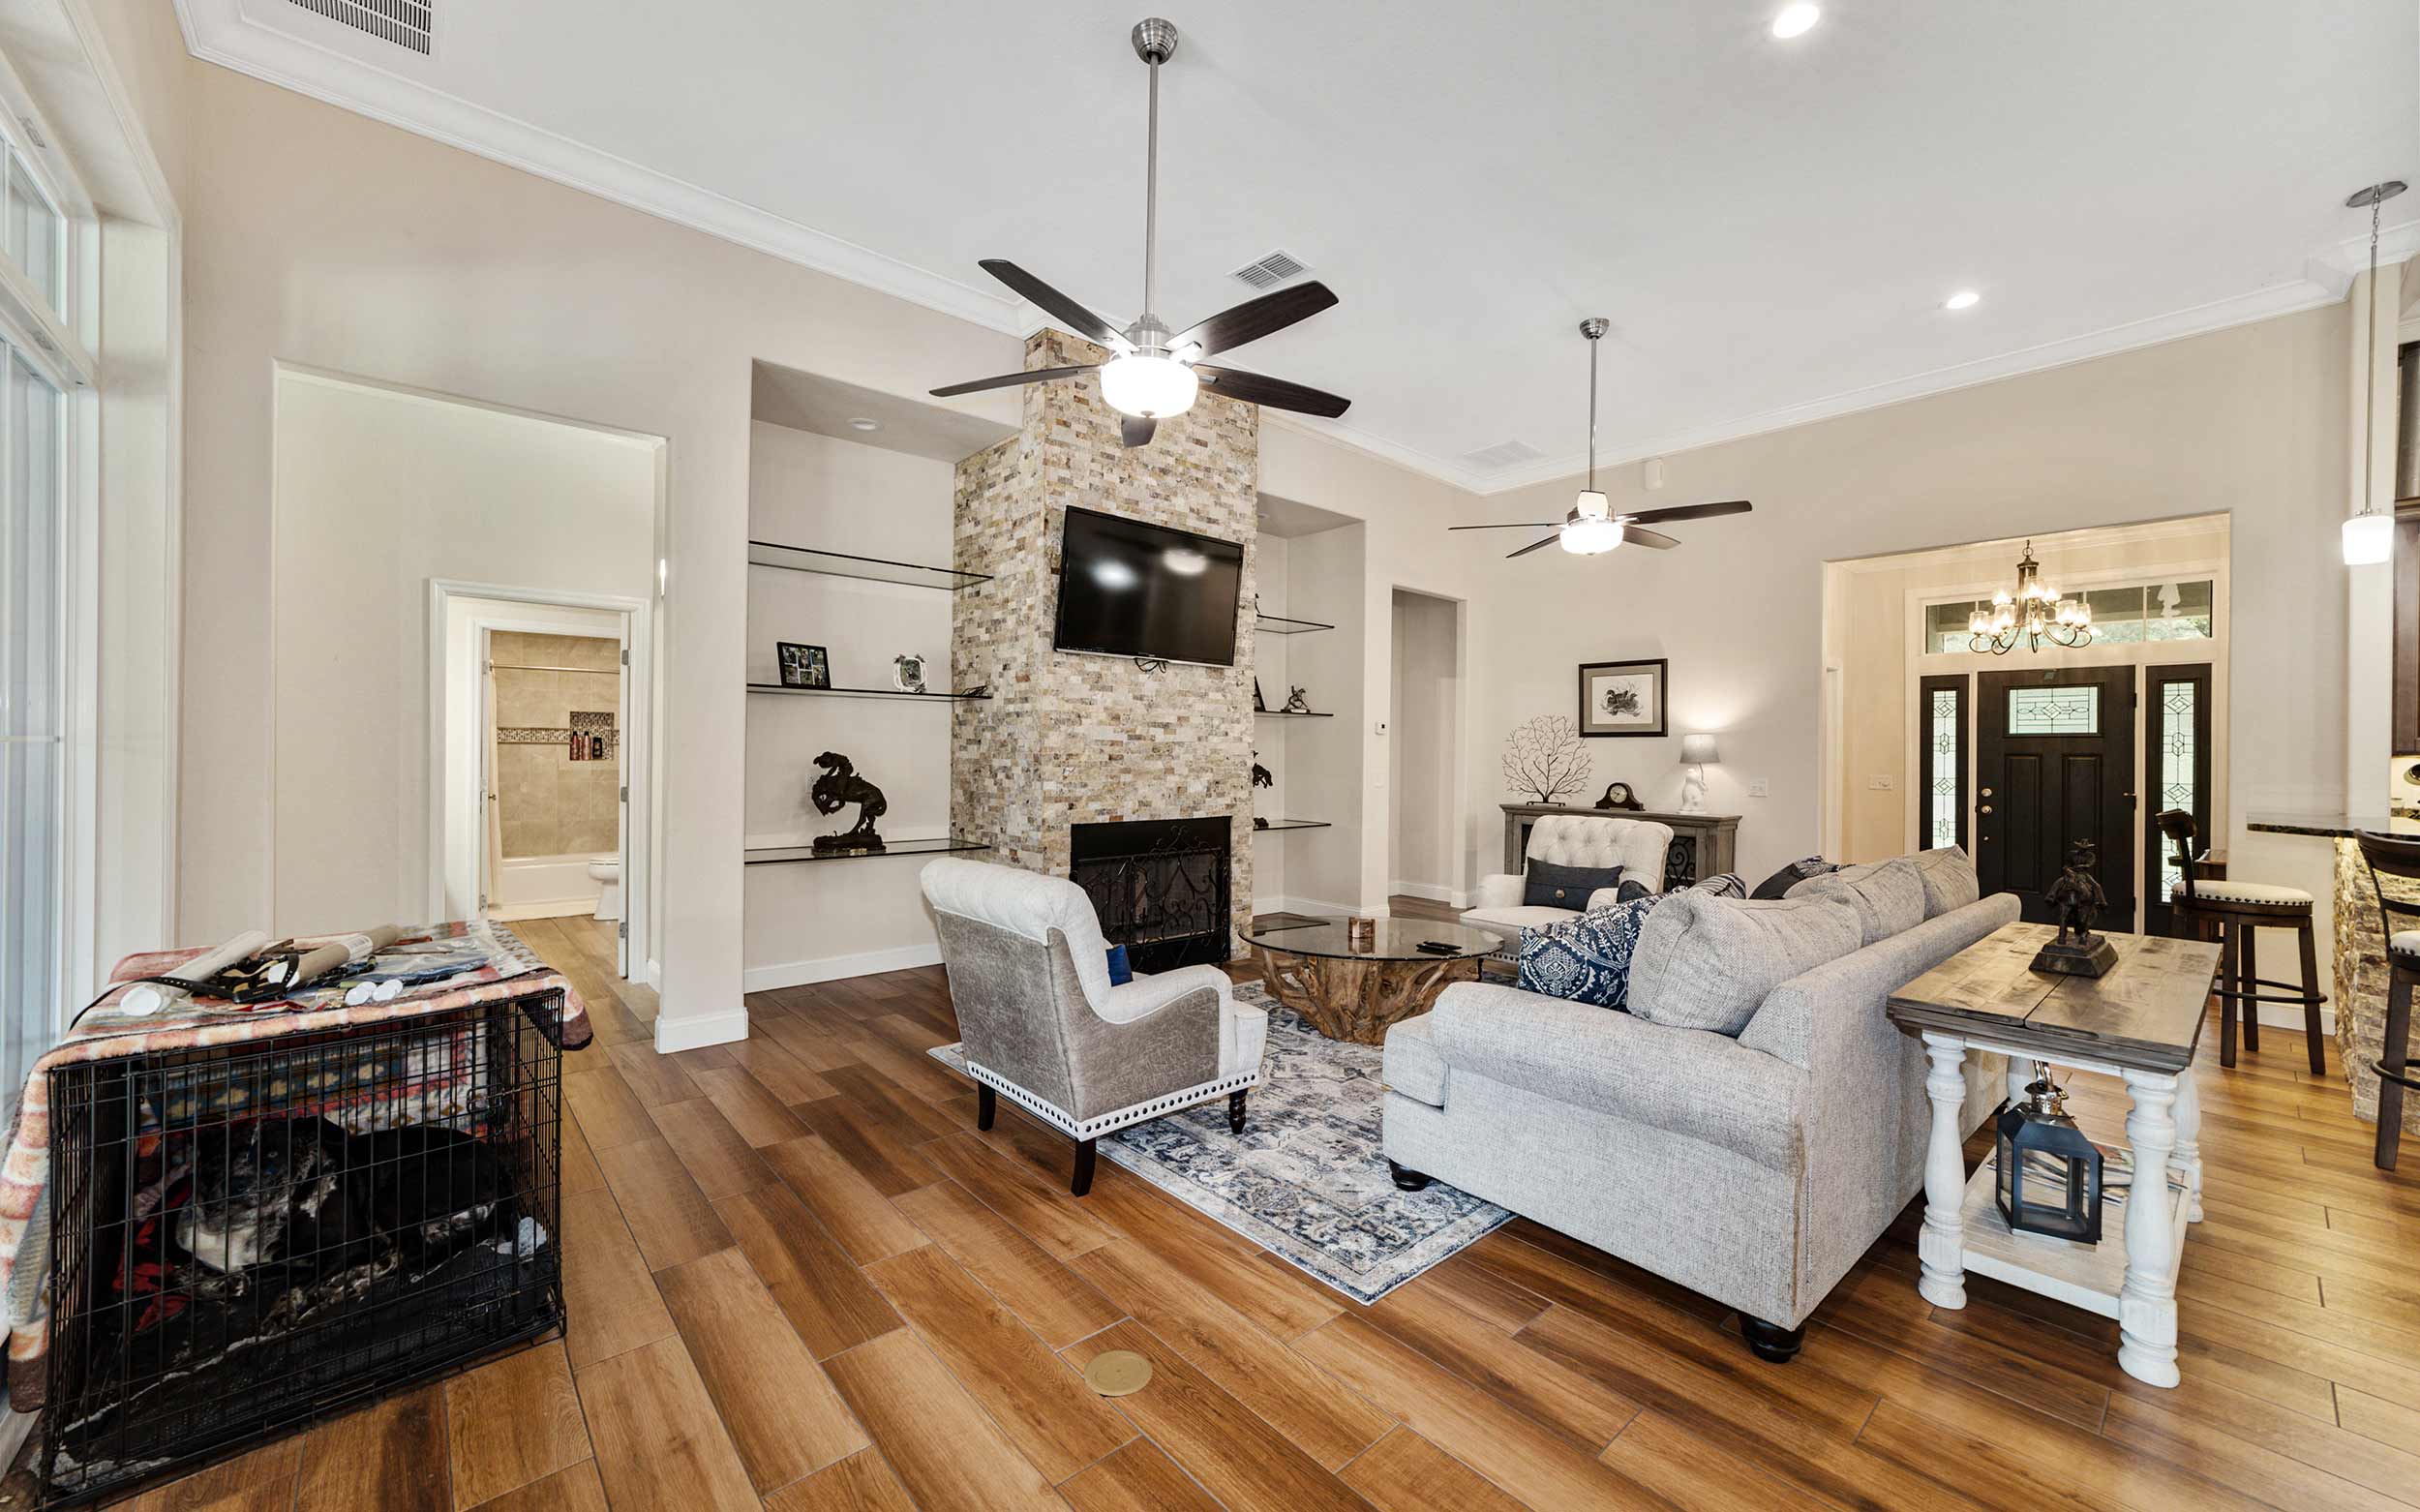 The main living area with built-in bookshelves and floor-to-ceiling stone fireplace.